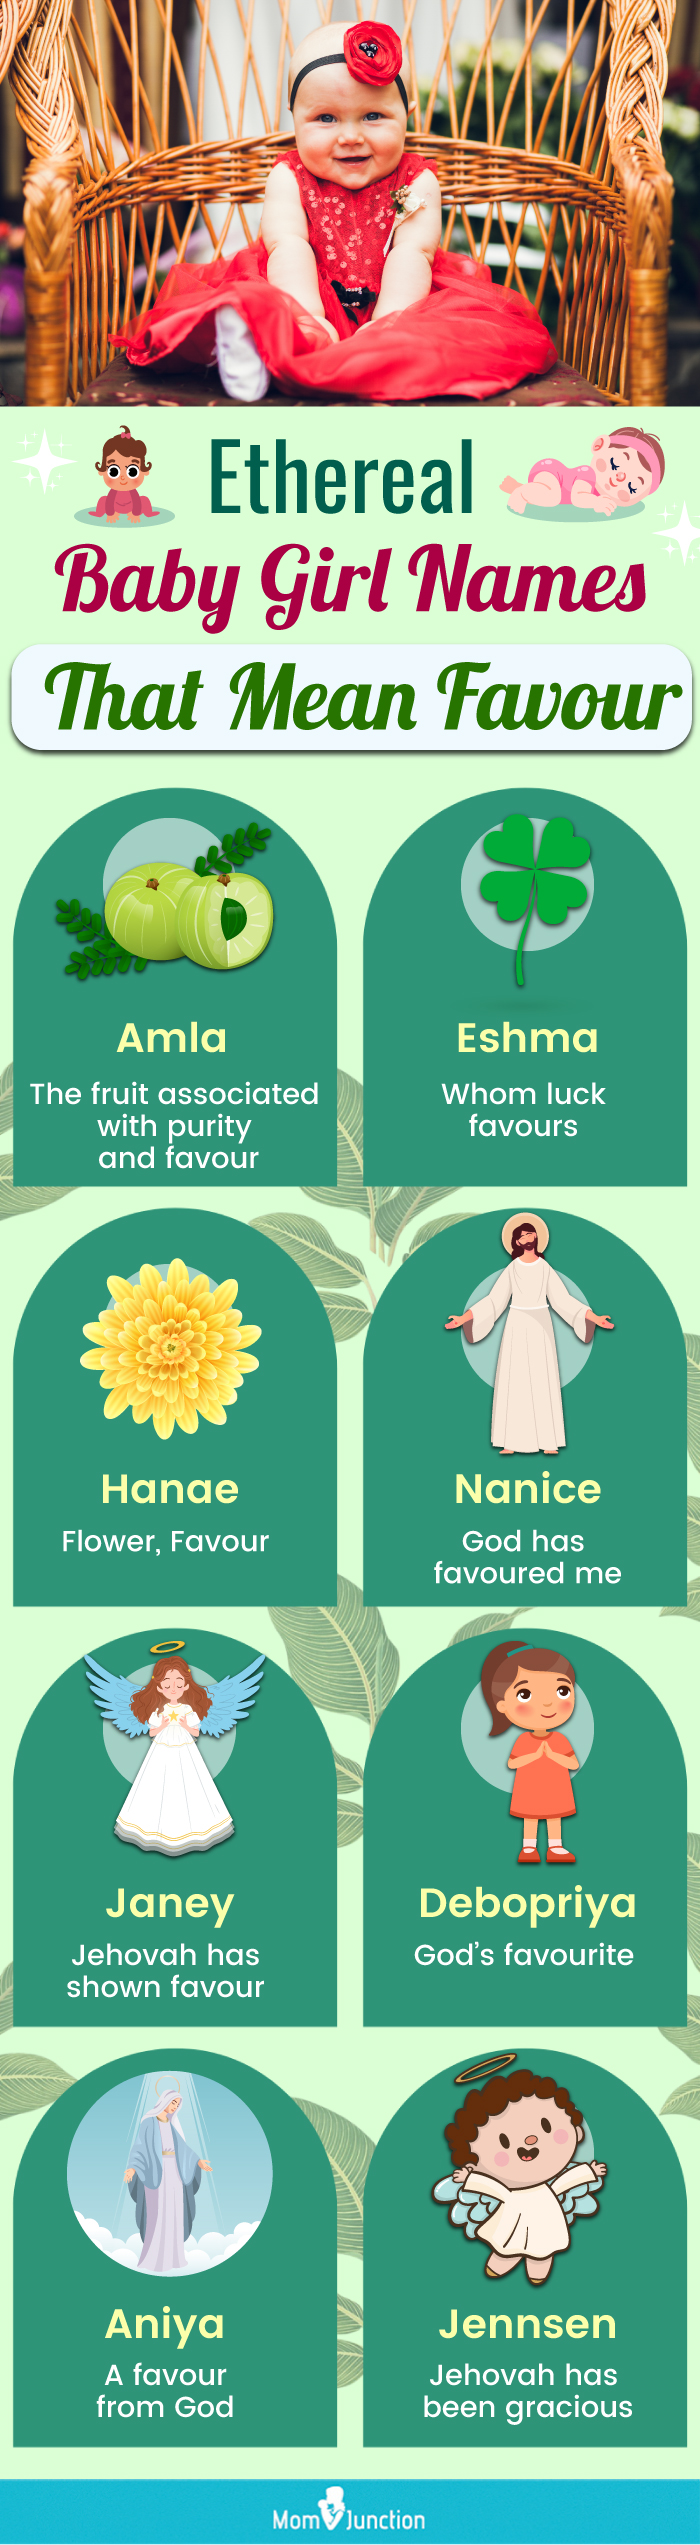 ethereal baby girl names that mean favour (infographic)